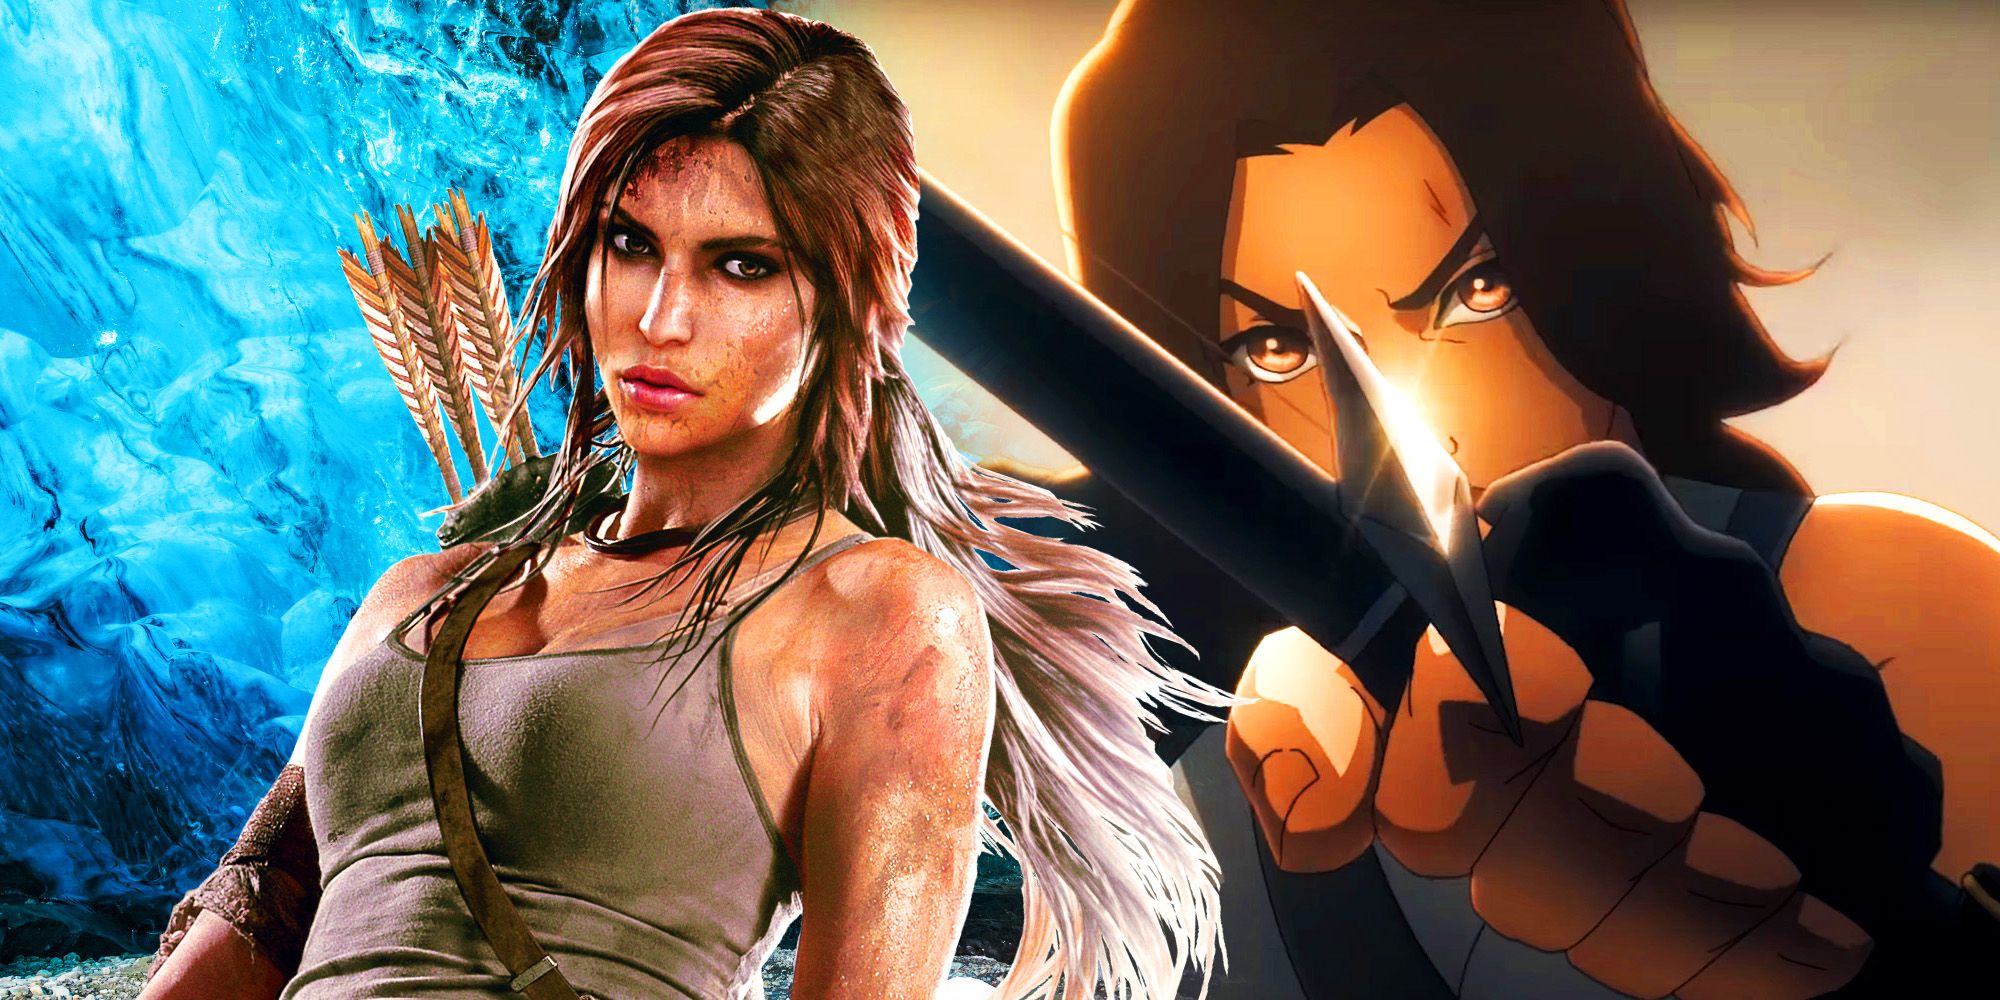 Lara Croft from the Tomb Raider video game series and from the animated show